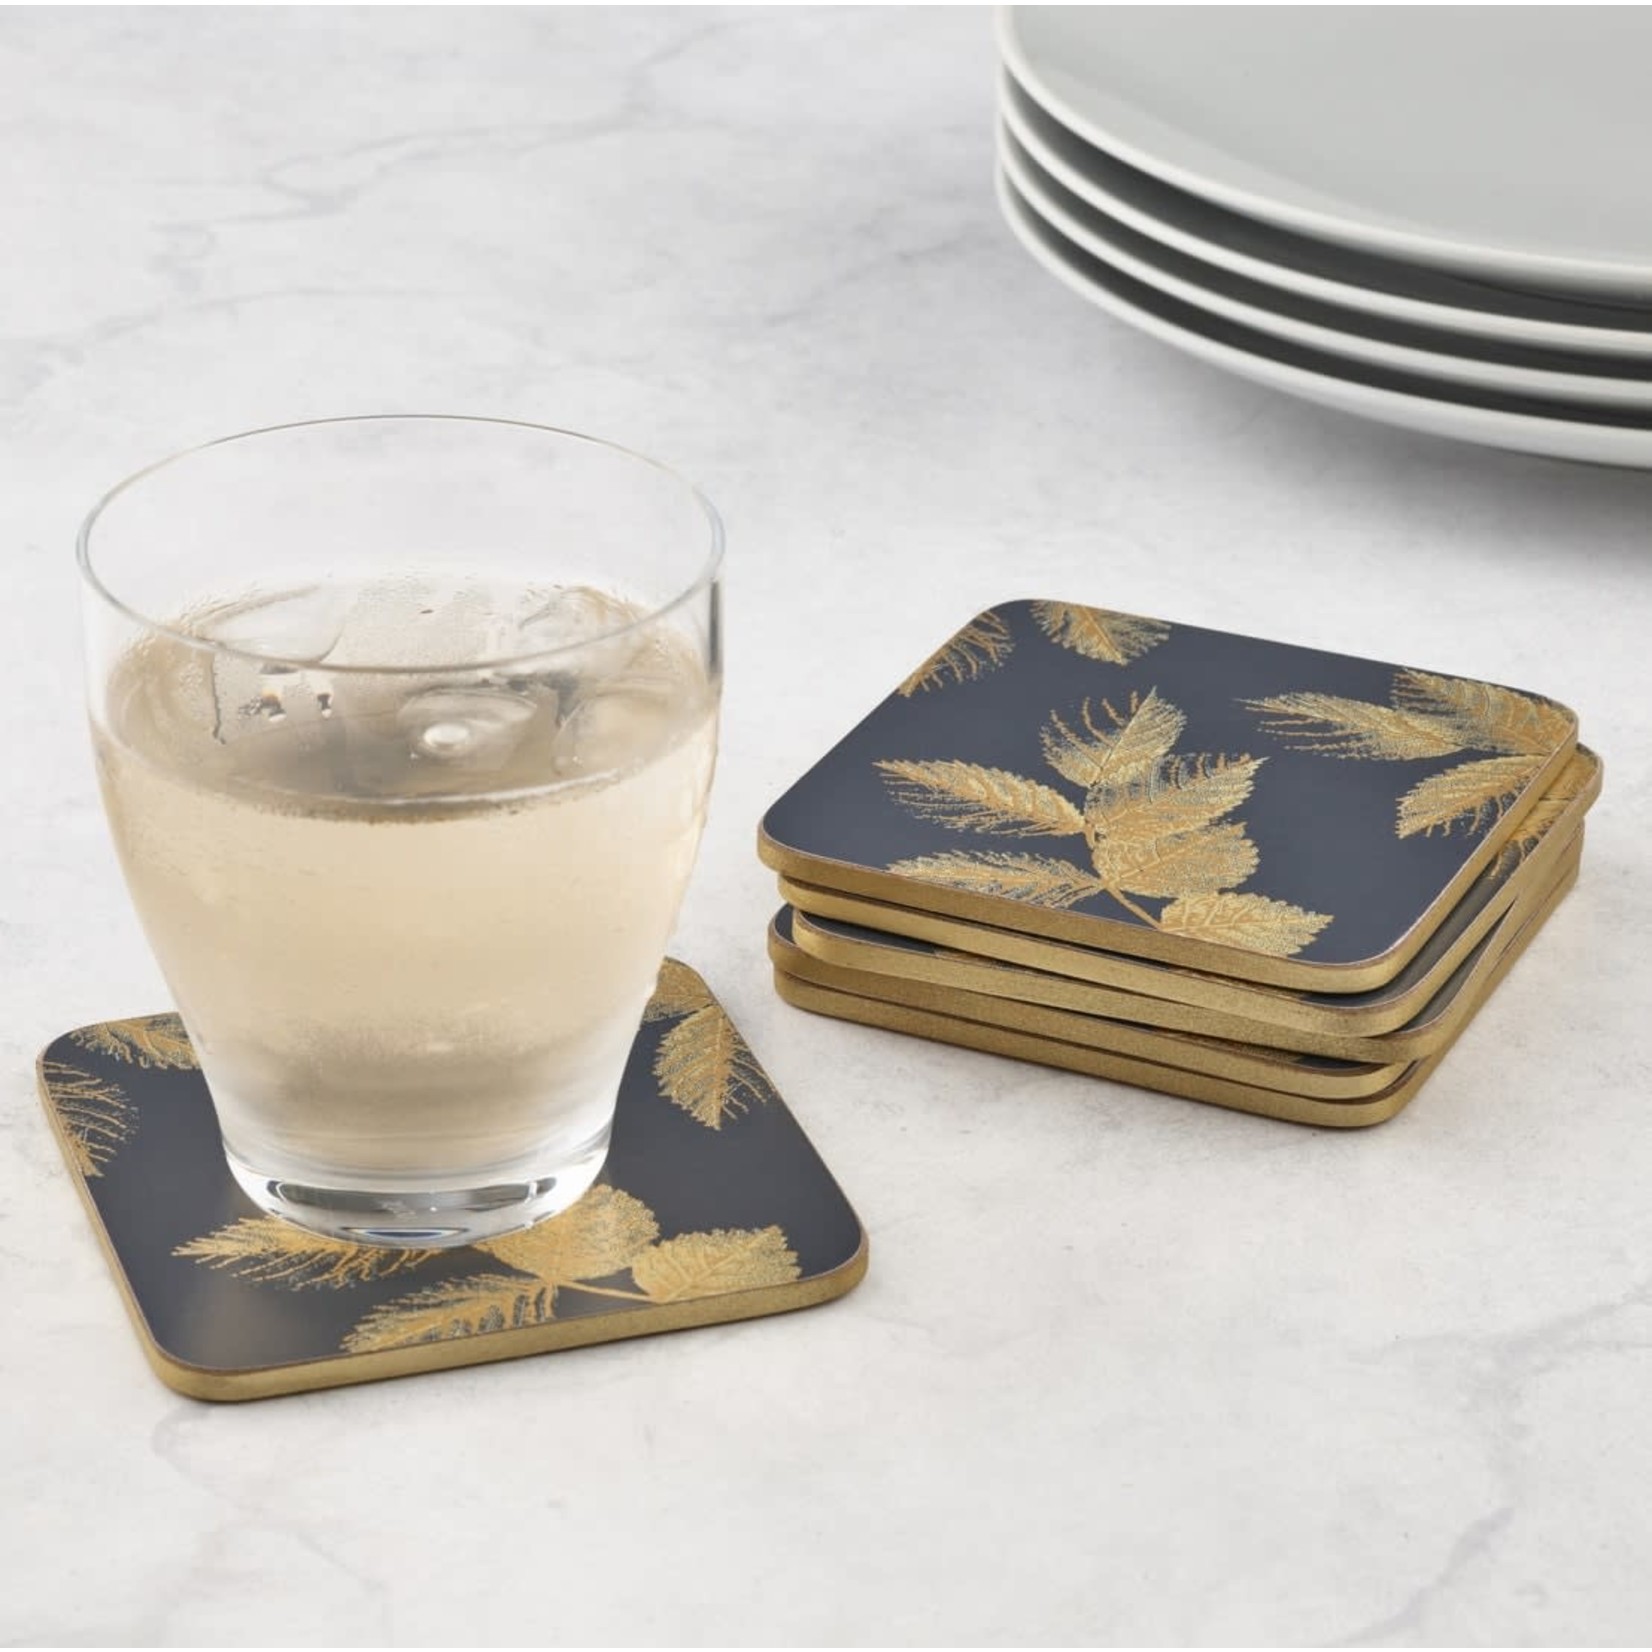 PORTMEIRION PIMPERNEL Etched Leaves Coasters S/6 - Navy